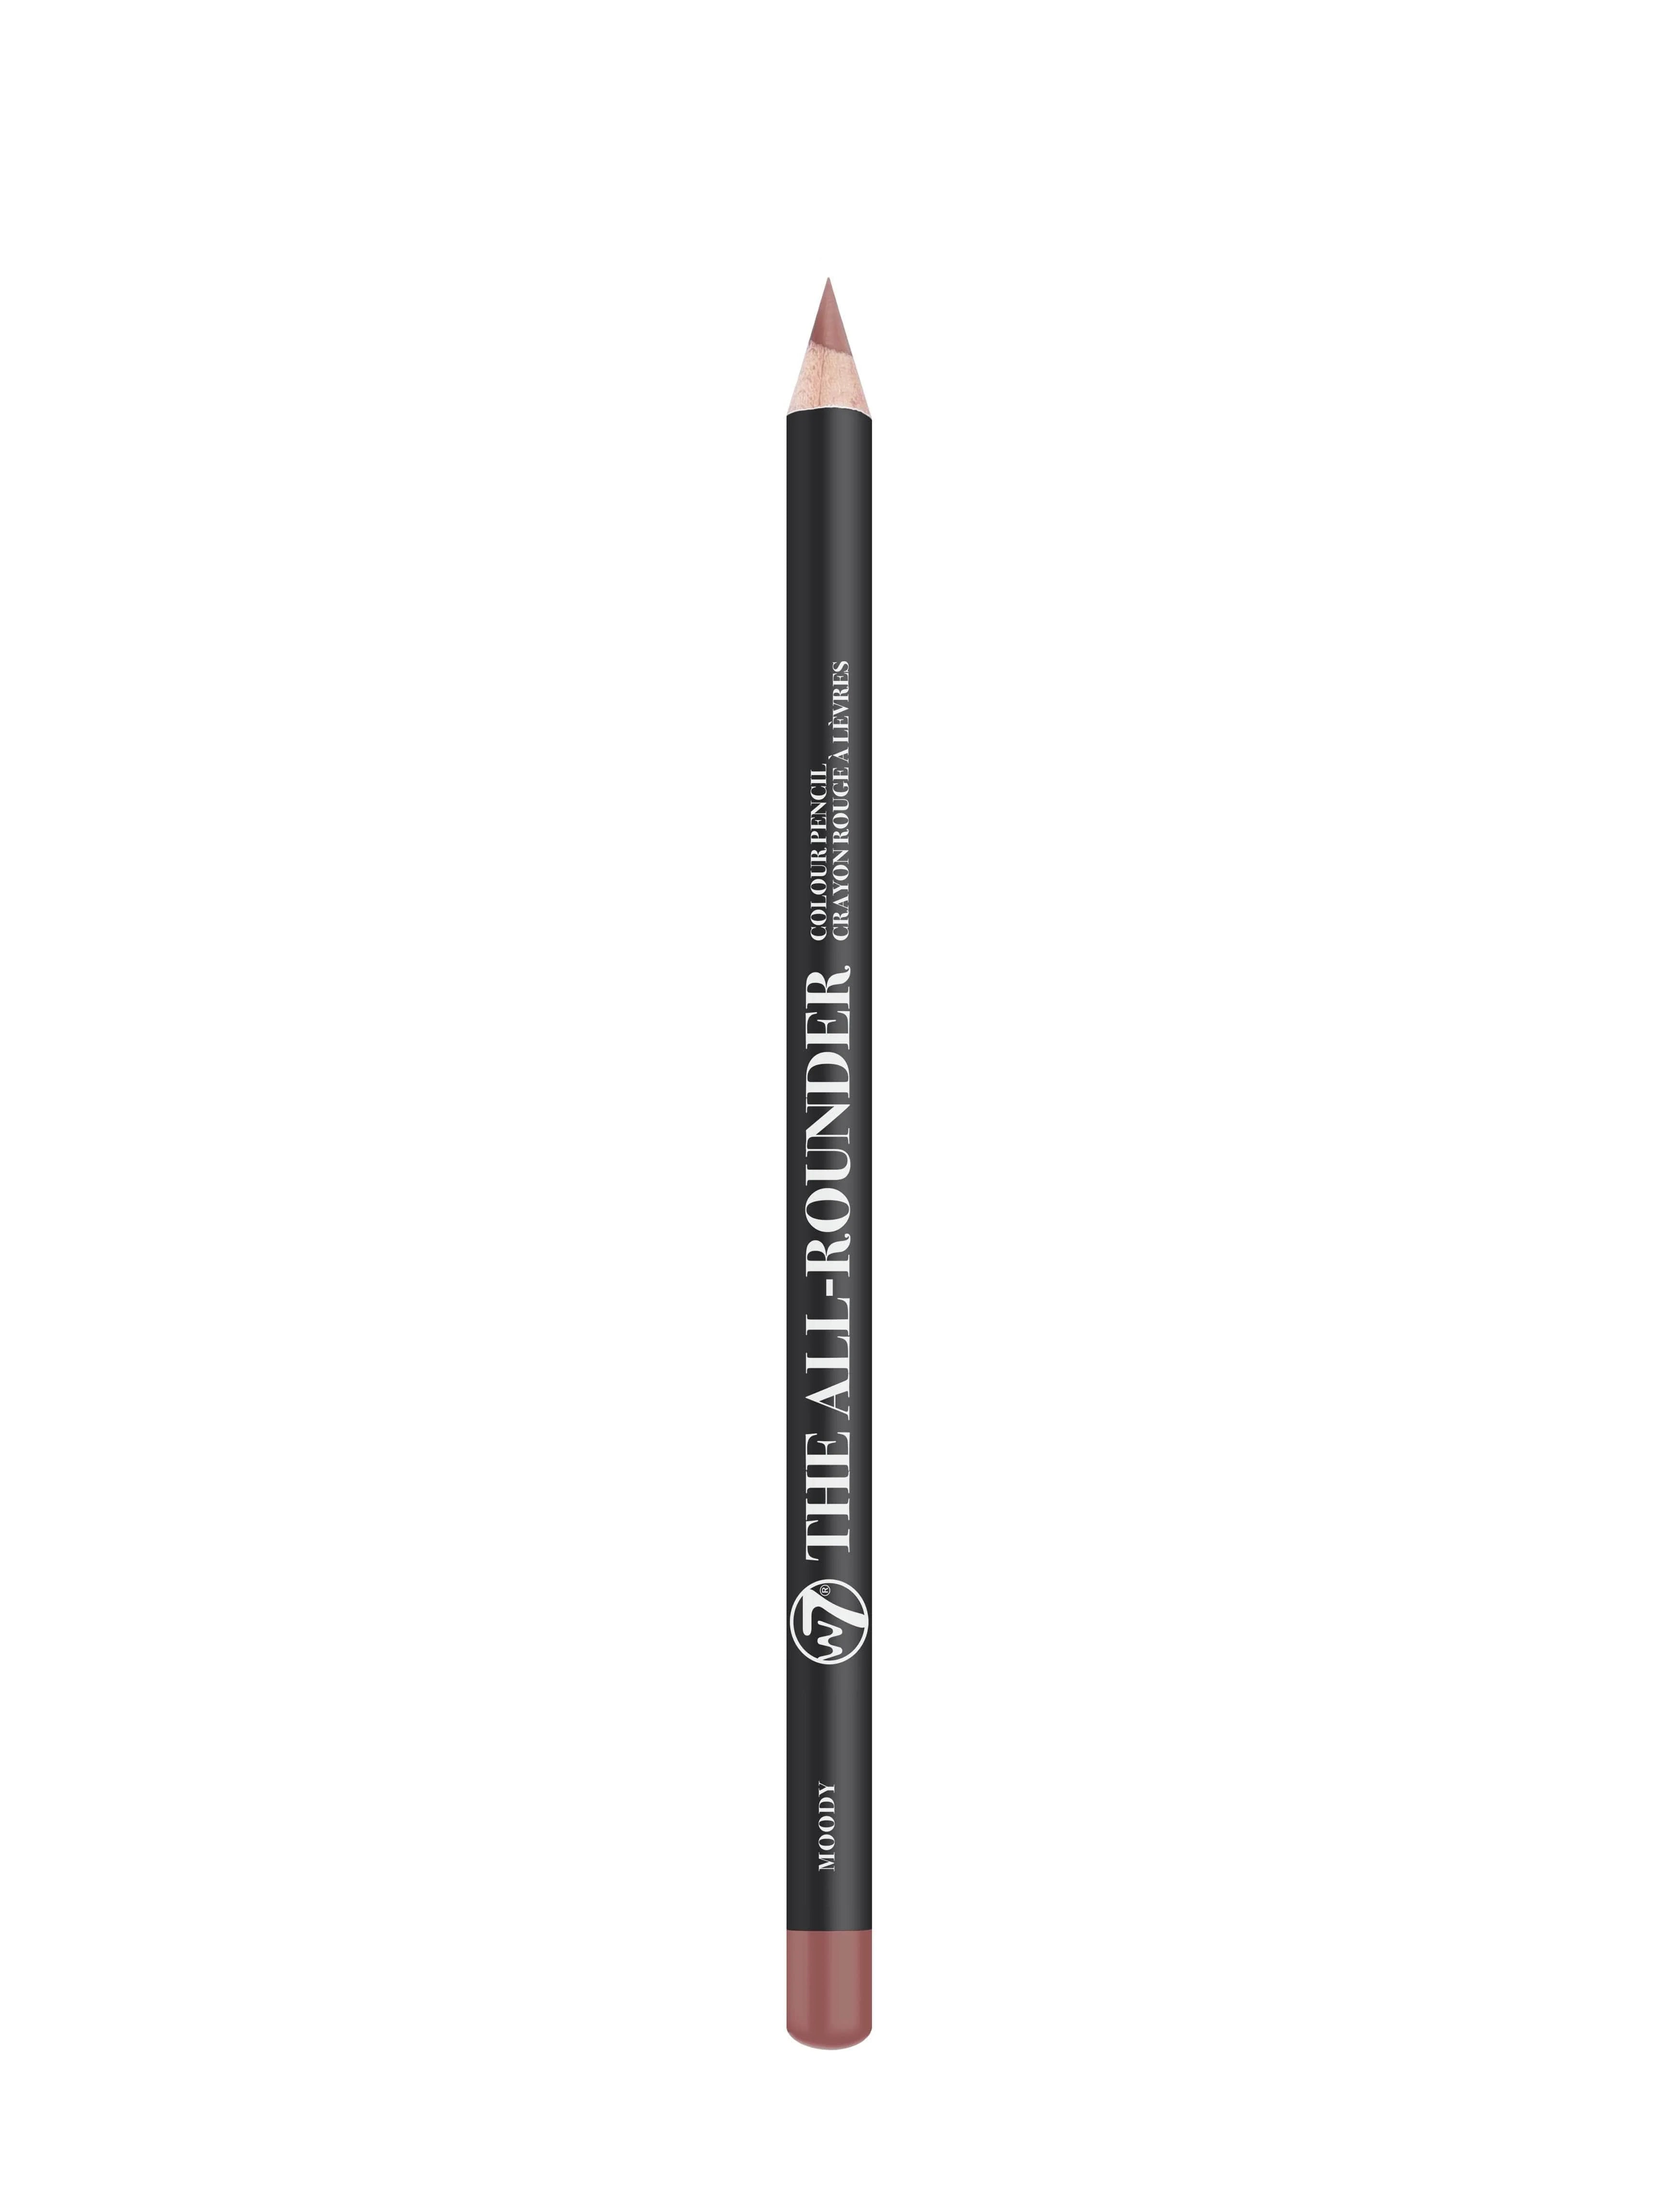 W7 The All-Rounder Lip/Eye pencil